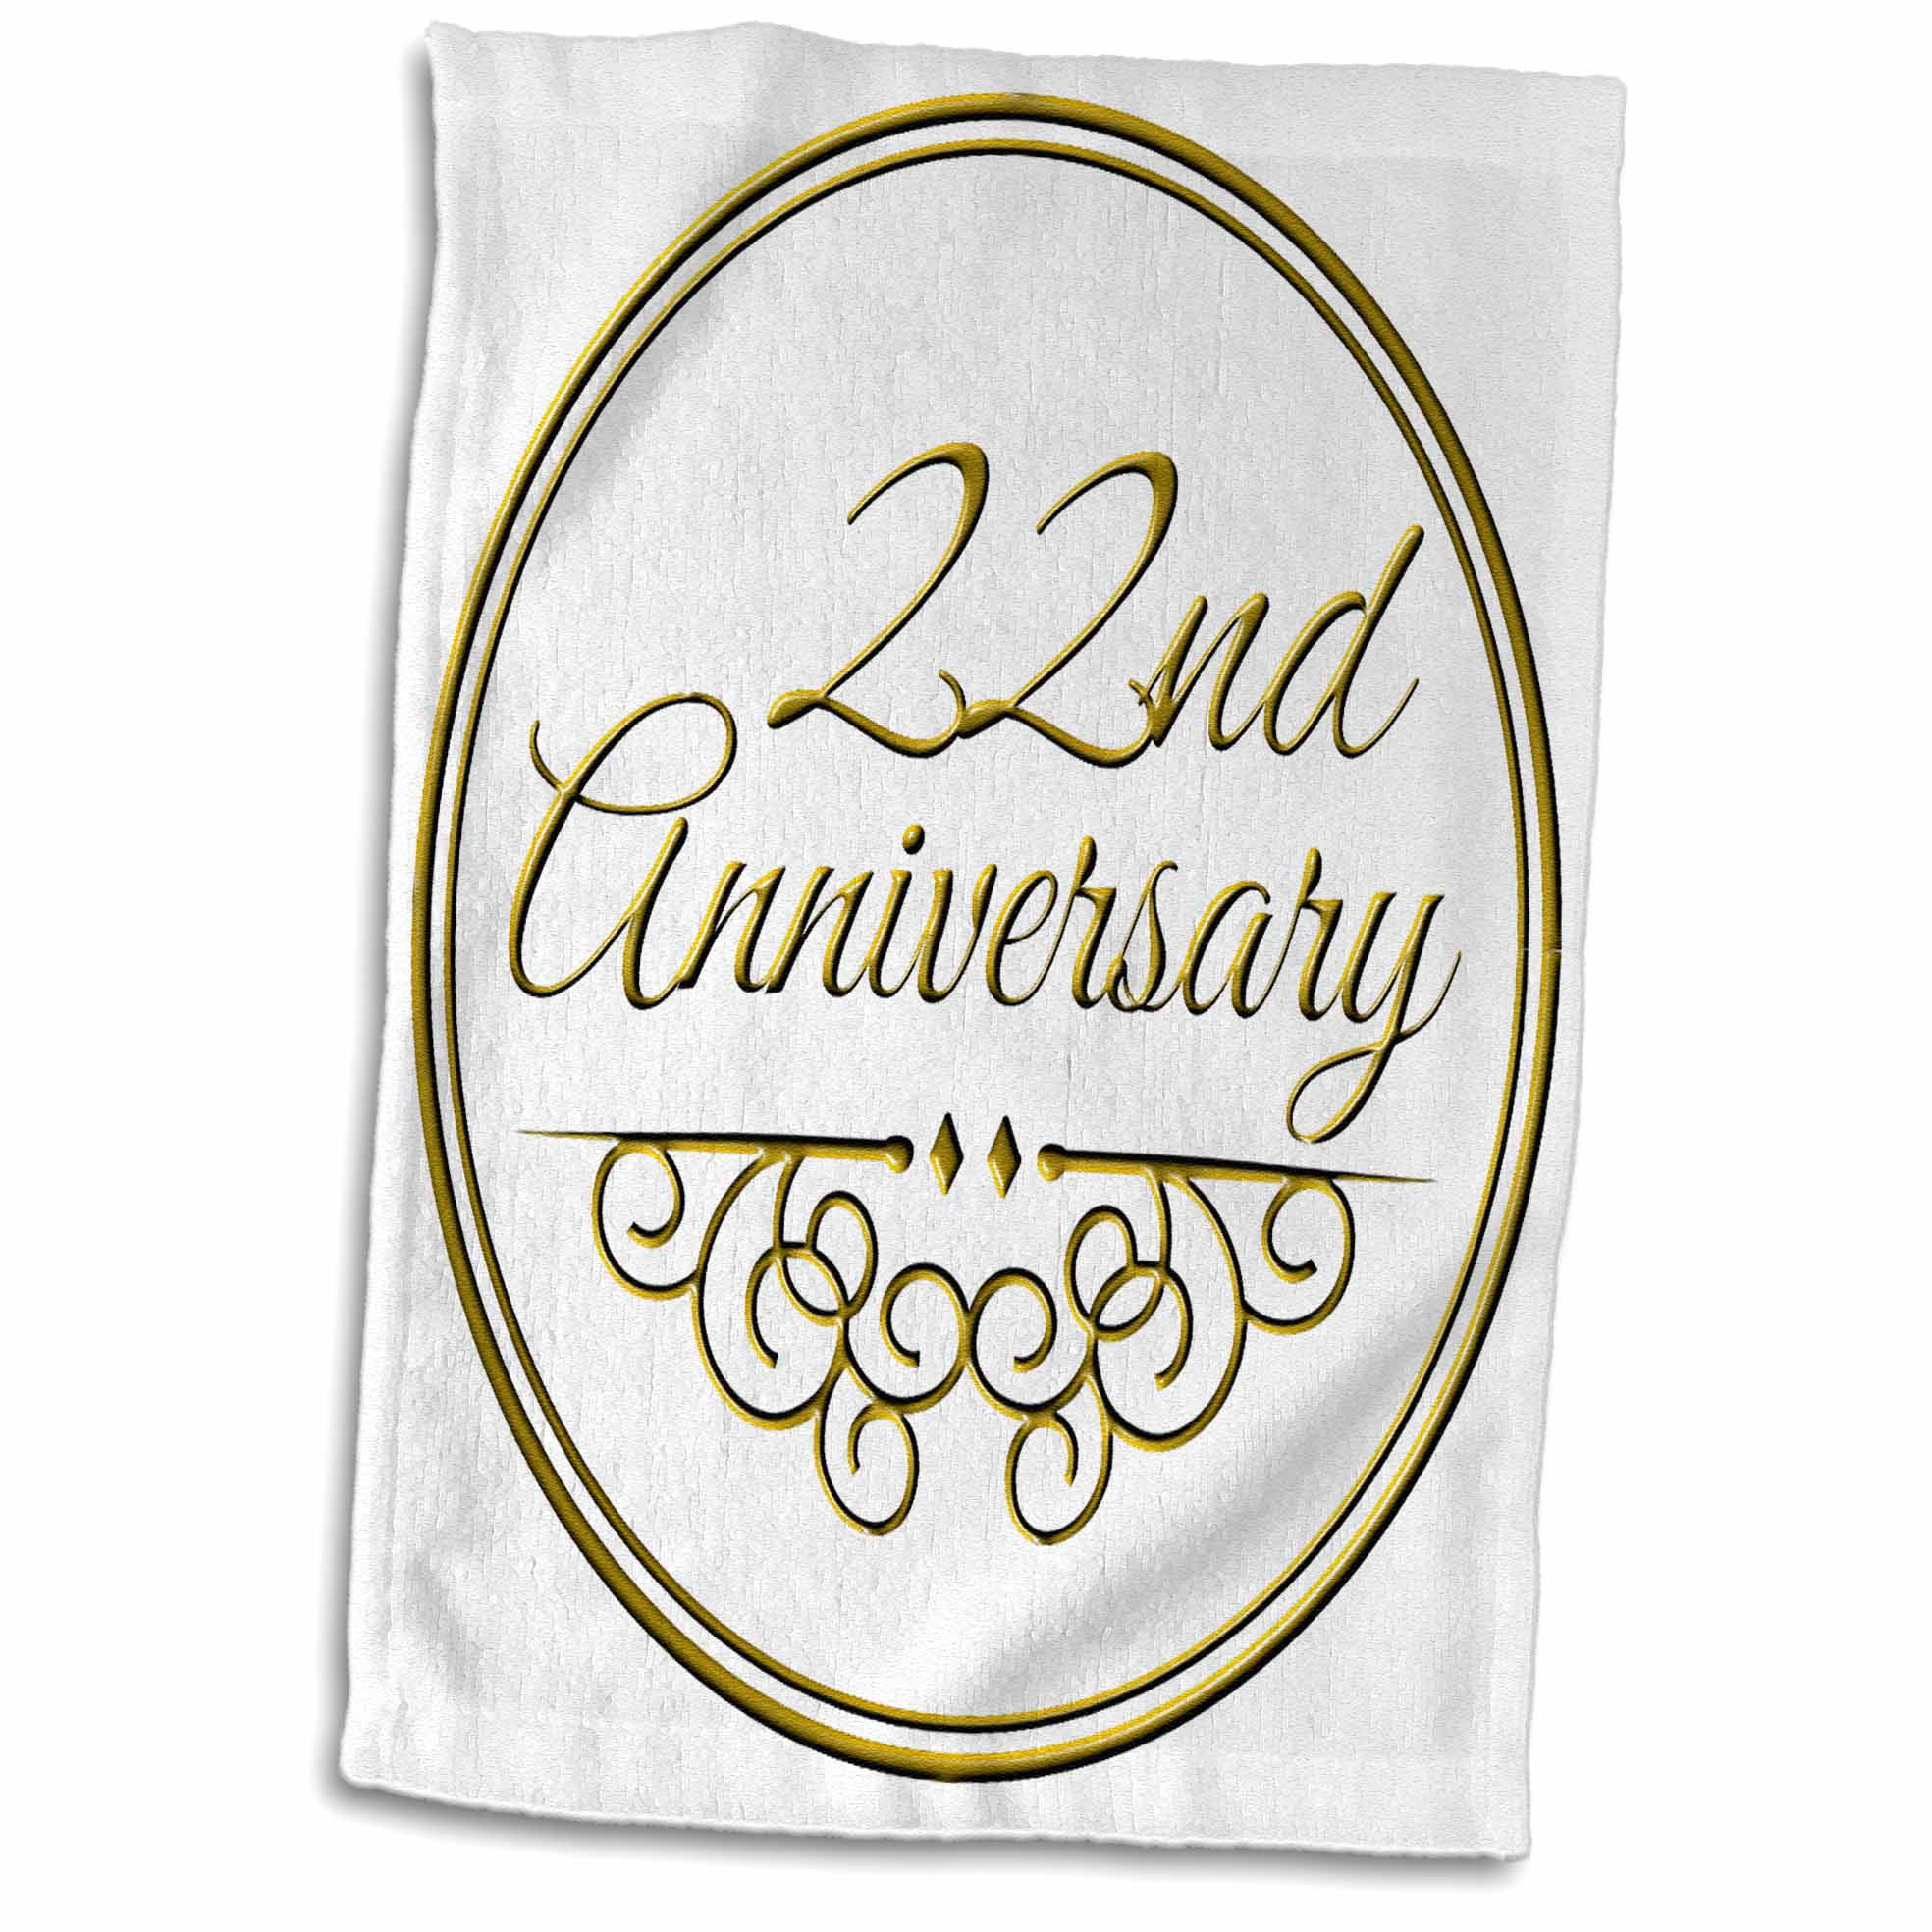 22nd Wedding Anniversary Gifts
 3dRose 22nd Anniversary t gold text for celebrating